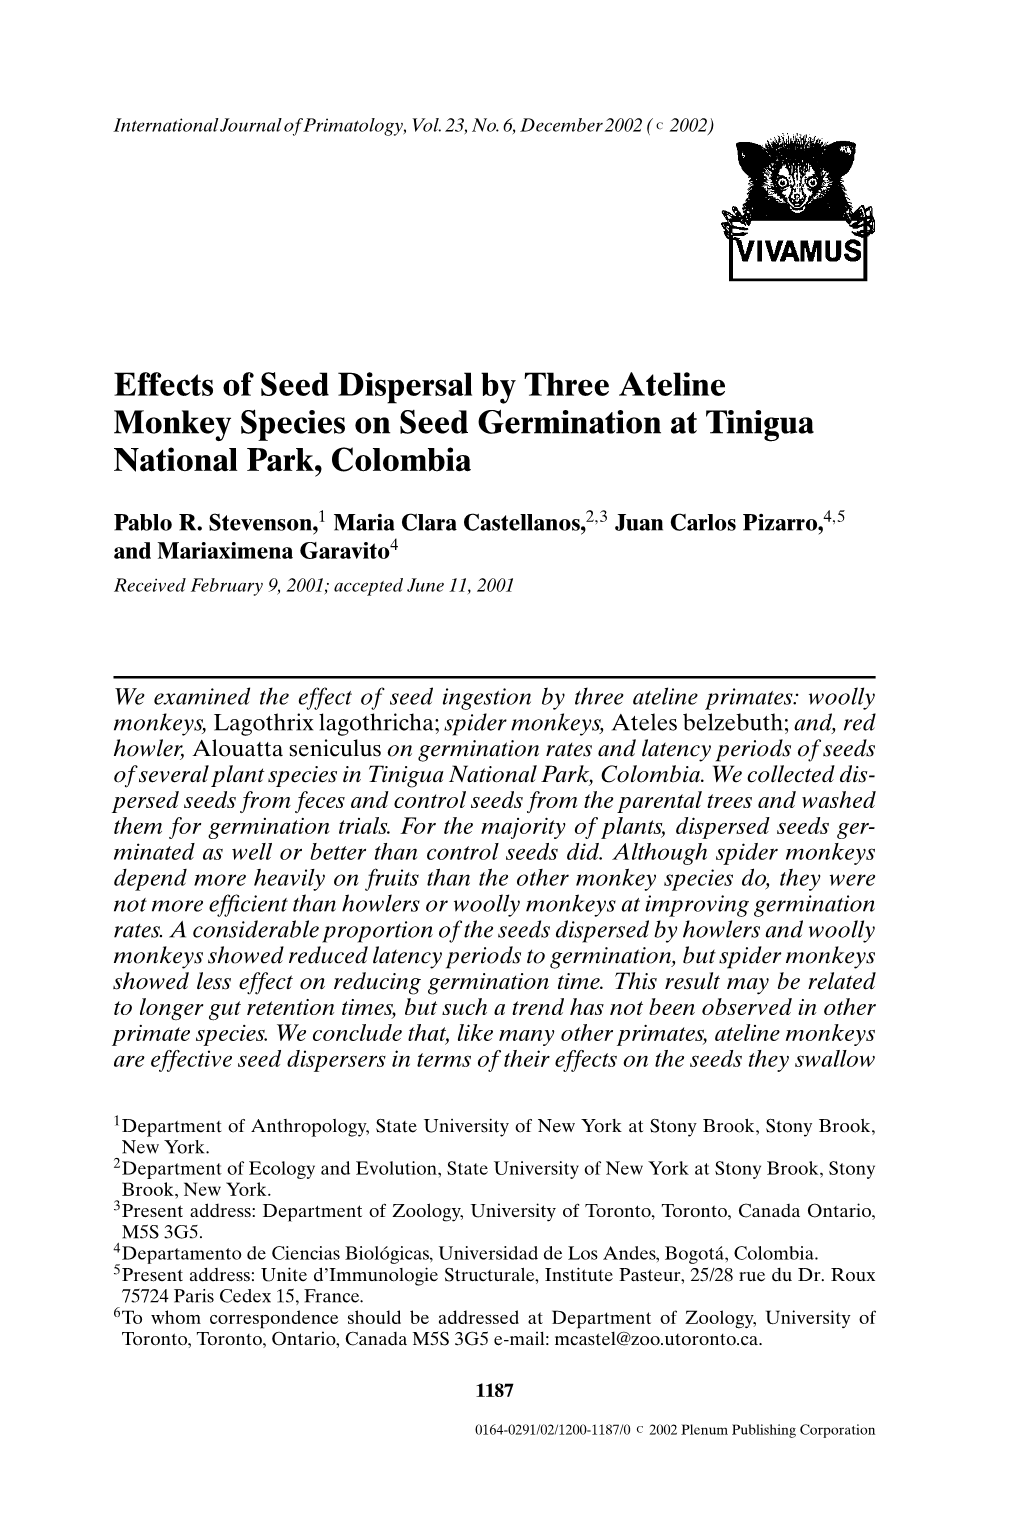 Effects of Seed Dispersal by Three Ateline Monkey Species on Seed Germination at Tinigua National Park, Colombia